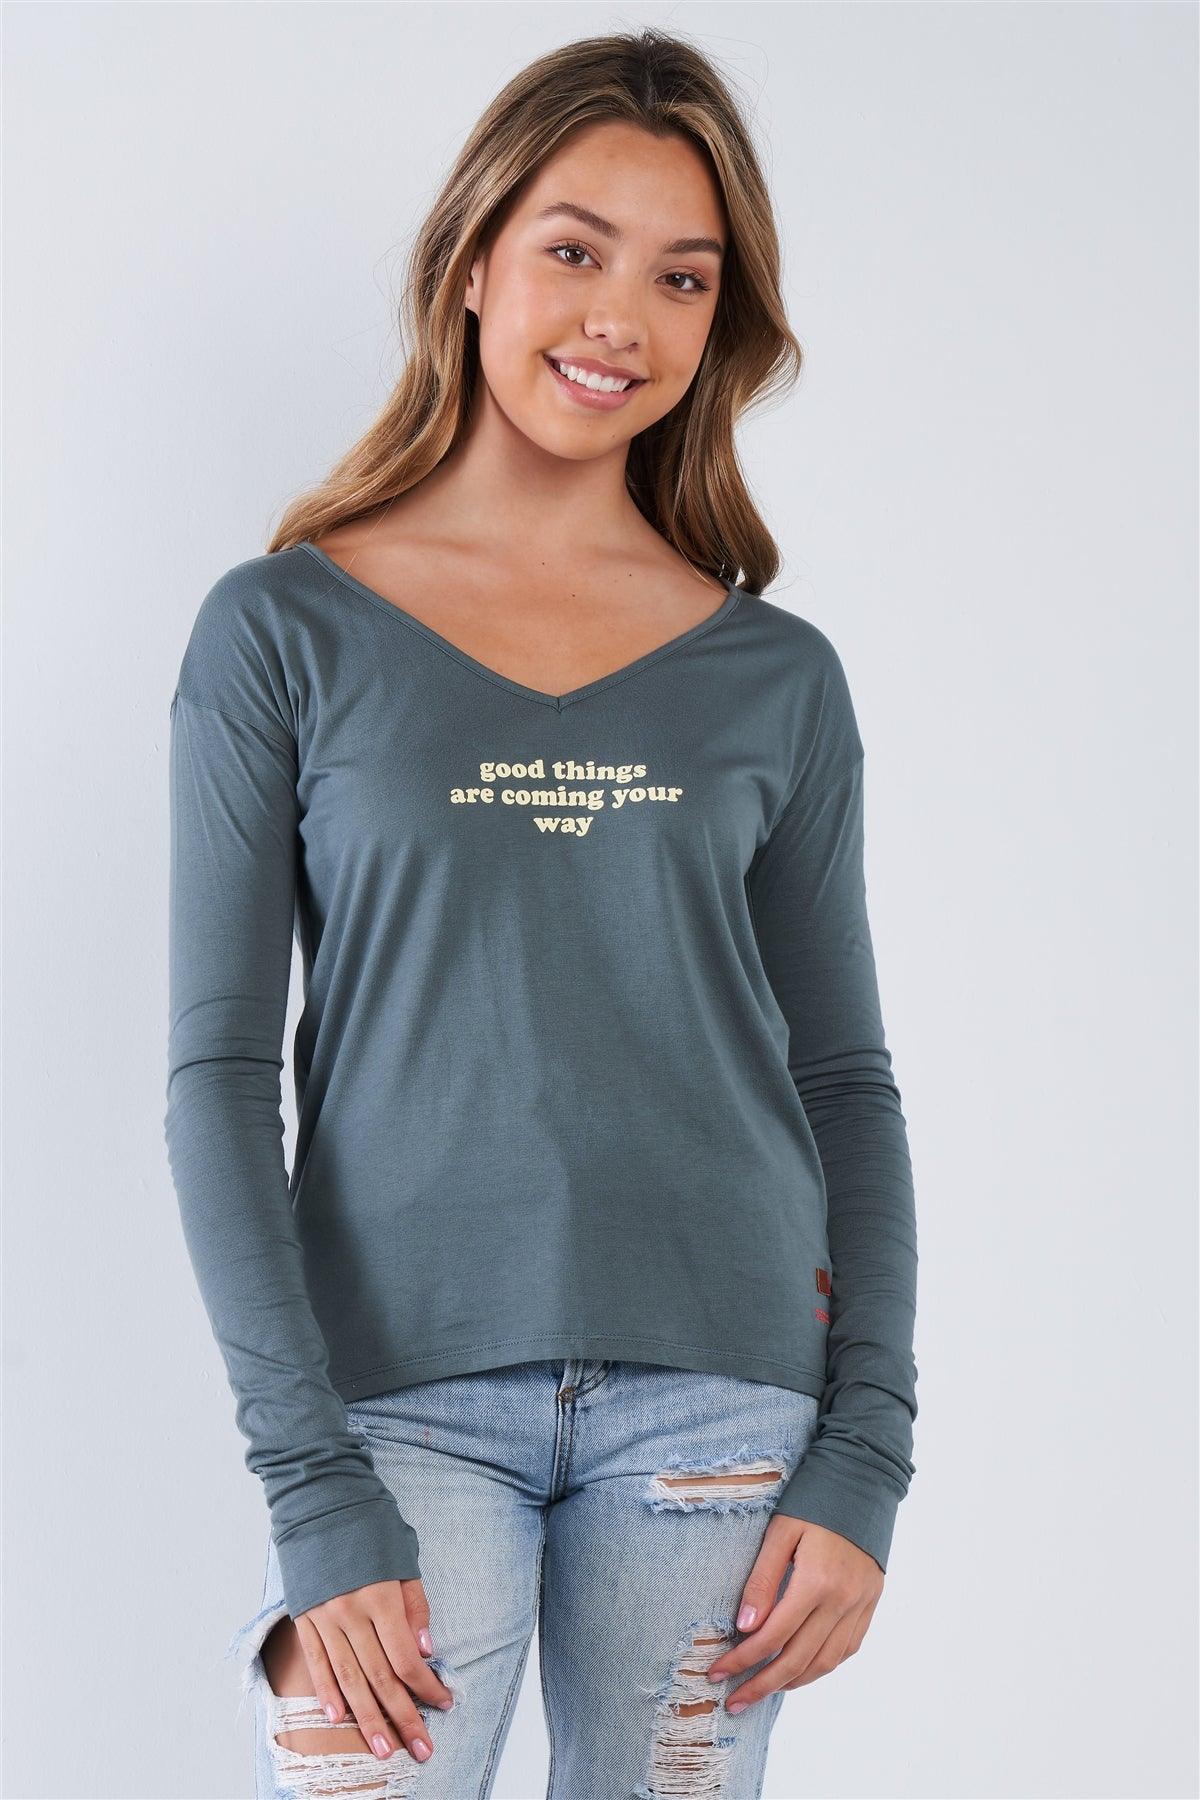 Kale Long Sleeve V-Neck "Good Things Are Coming Your Way" Top